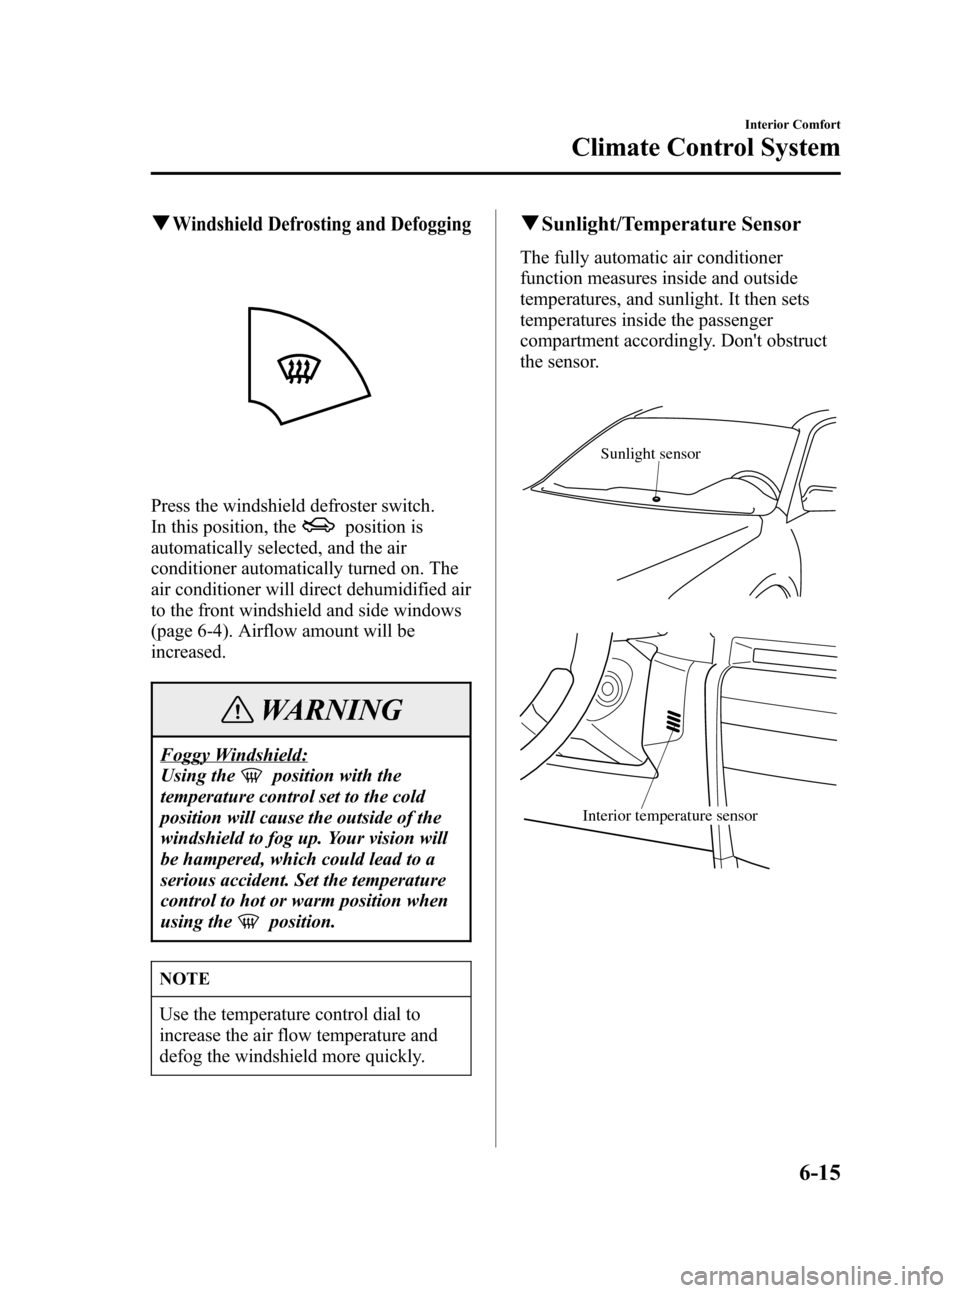 MAZDA MODEL 3 HATCHBACK 2006  Owners Manual (in English) Black plate (185,1)
qWindshield Defrosting and Defogging
Press the windshield defroster switch.
In this position, the
position is
automatically selected, and the air
conditioner automatically turned o